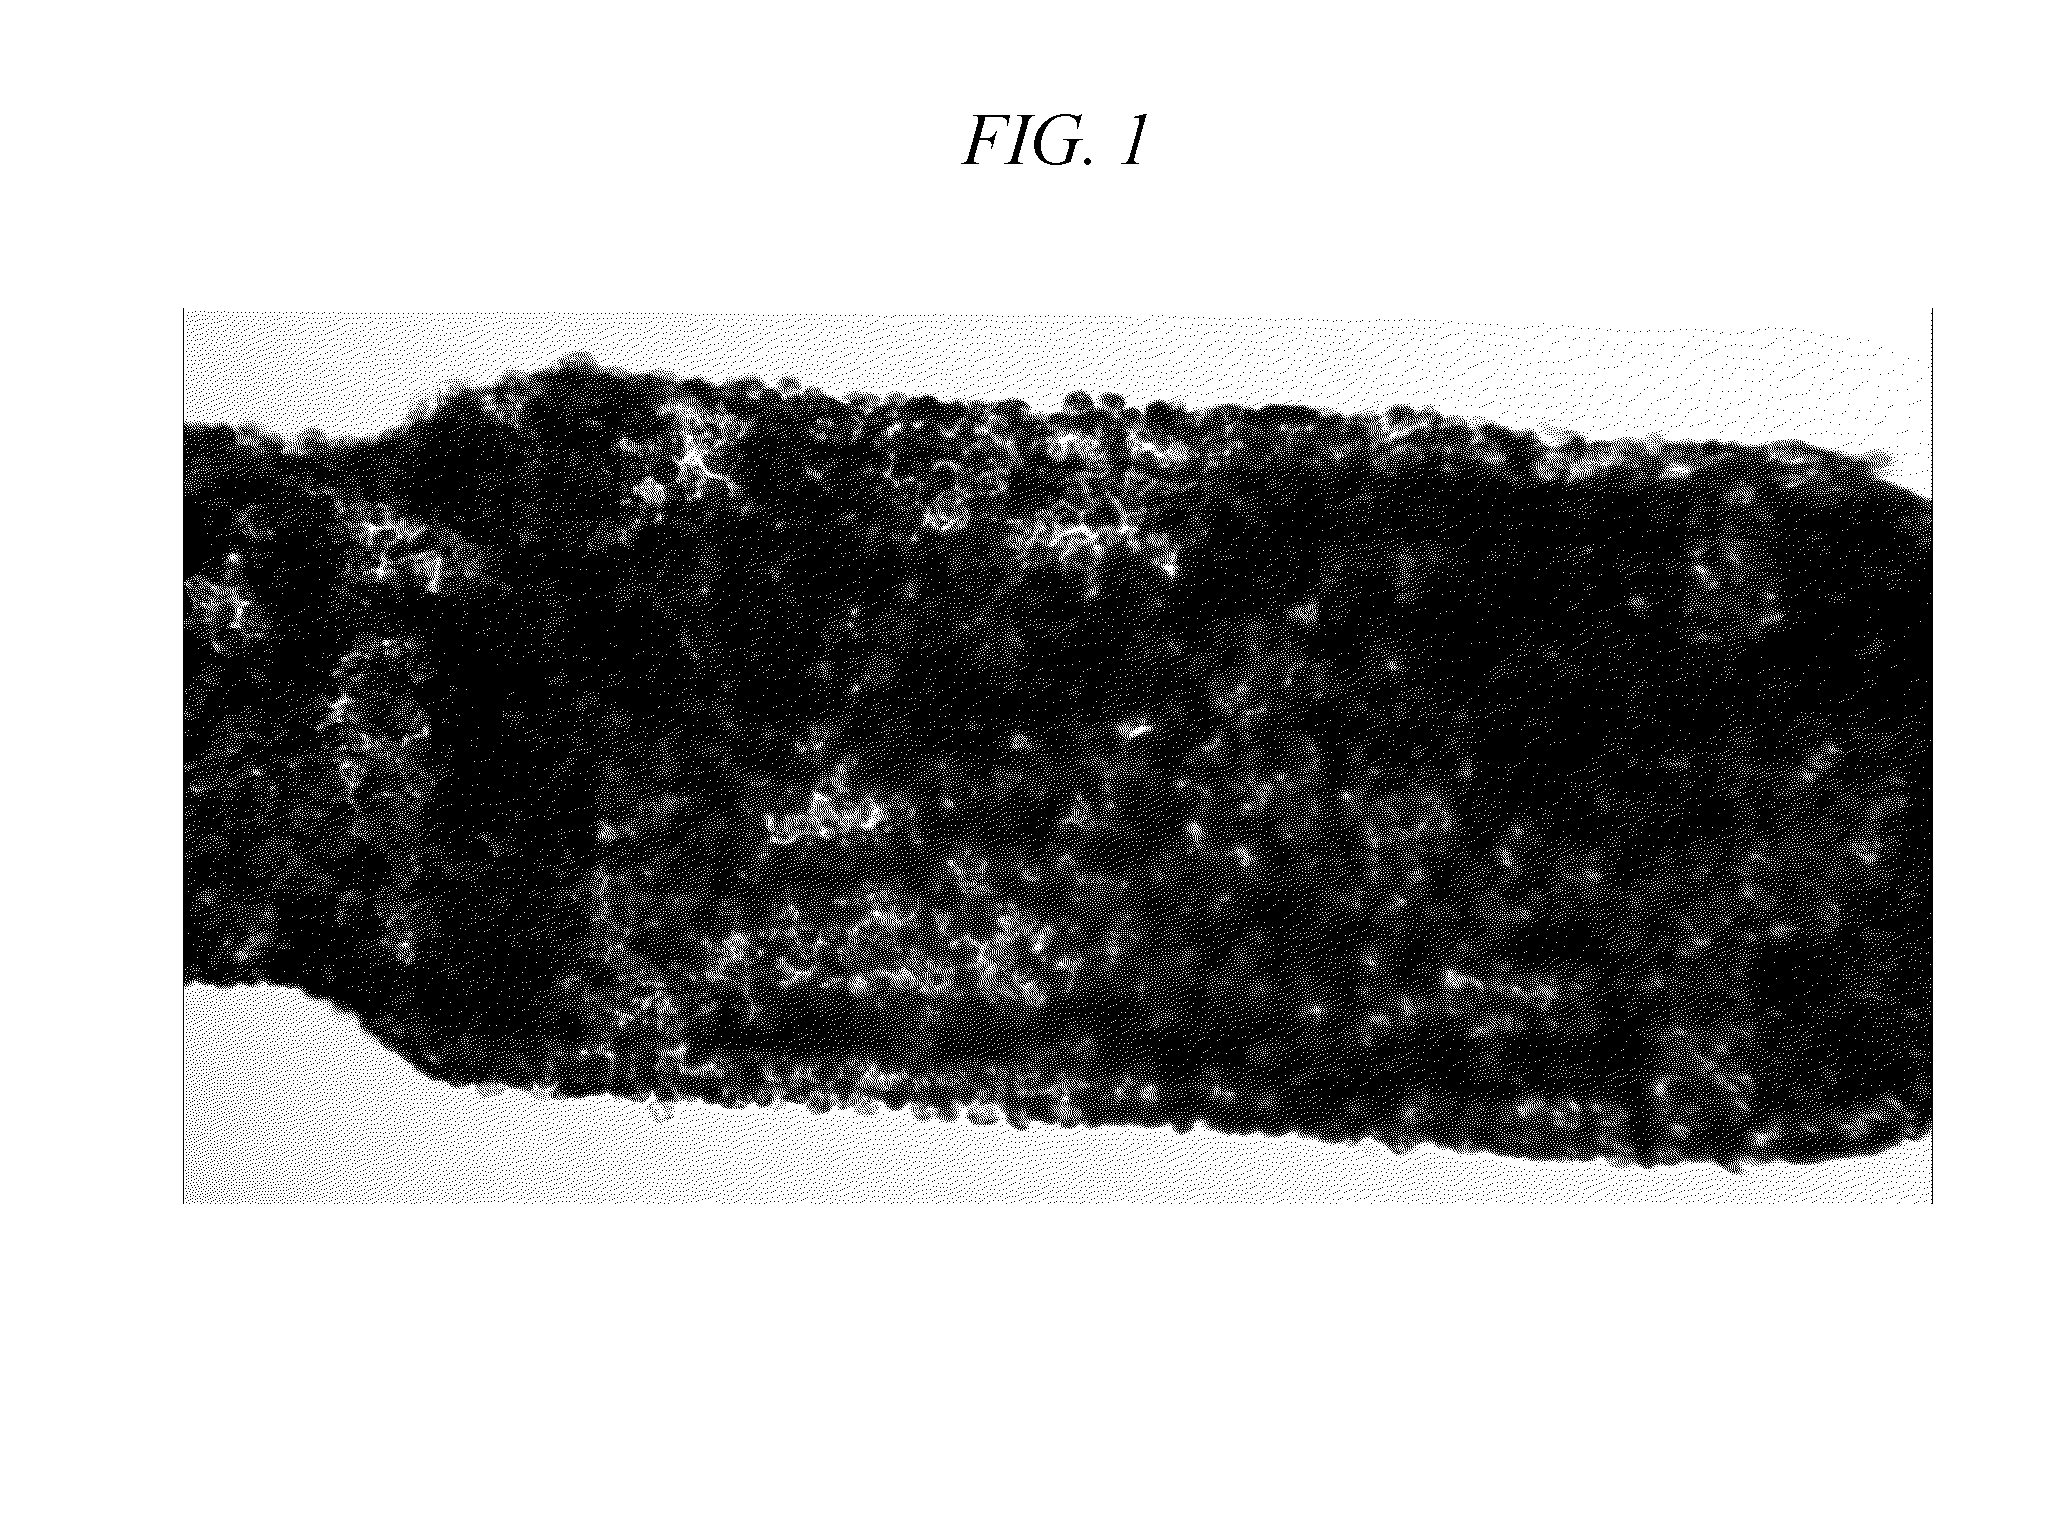 Method of cryopreservation of stem cell-derived retinal pigment epithelial cells on polymeric substrate